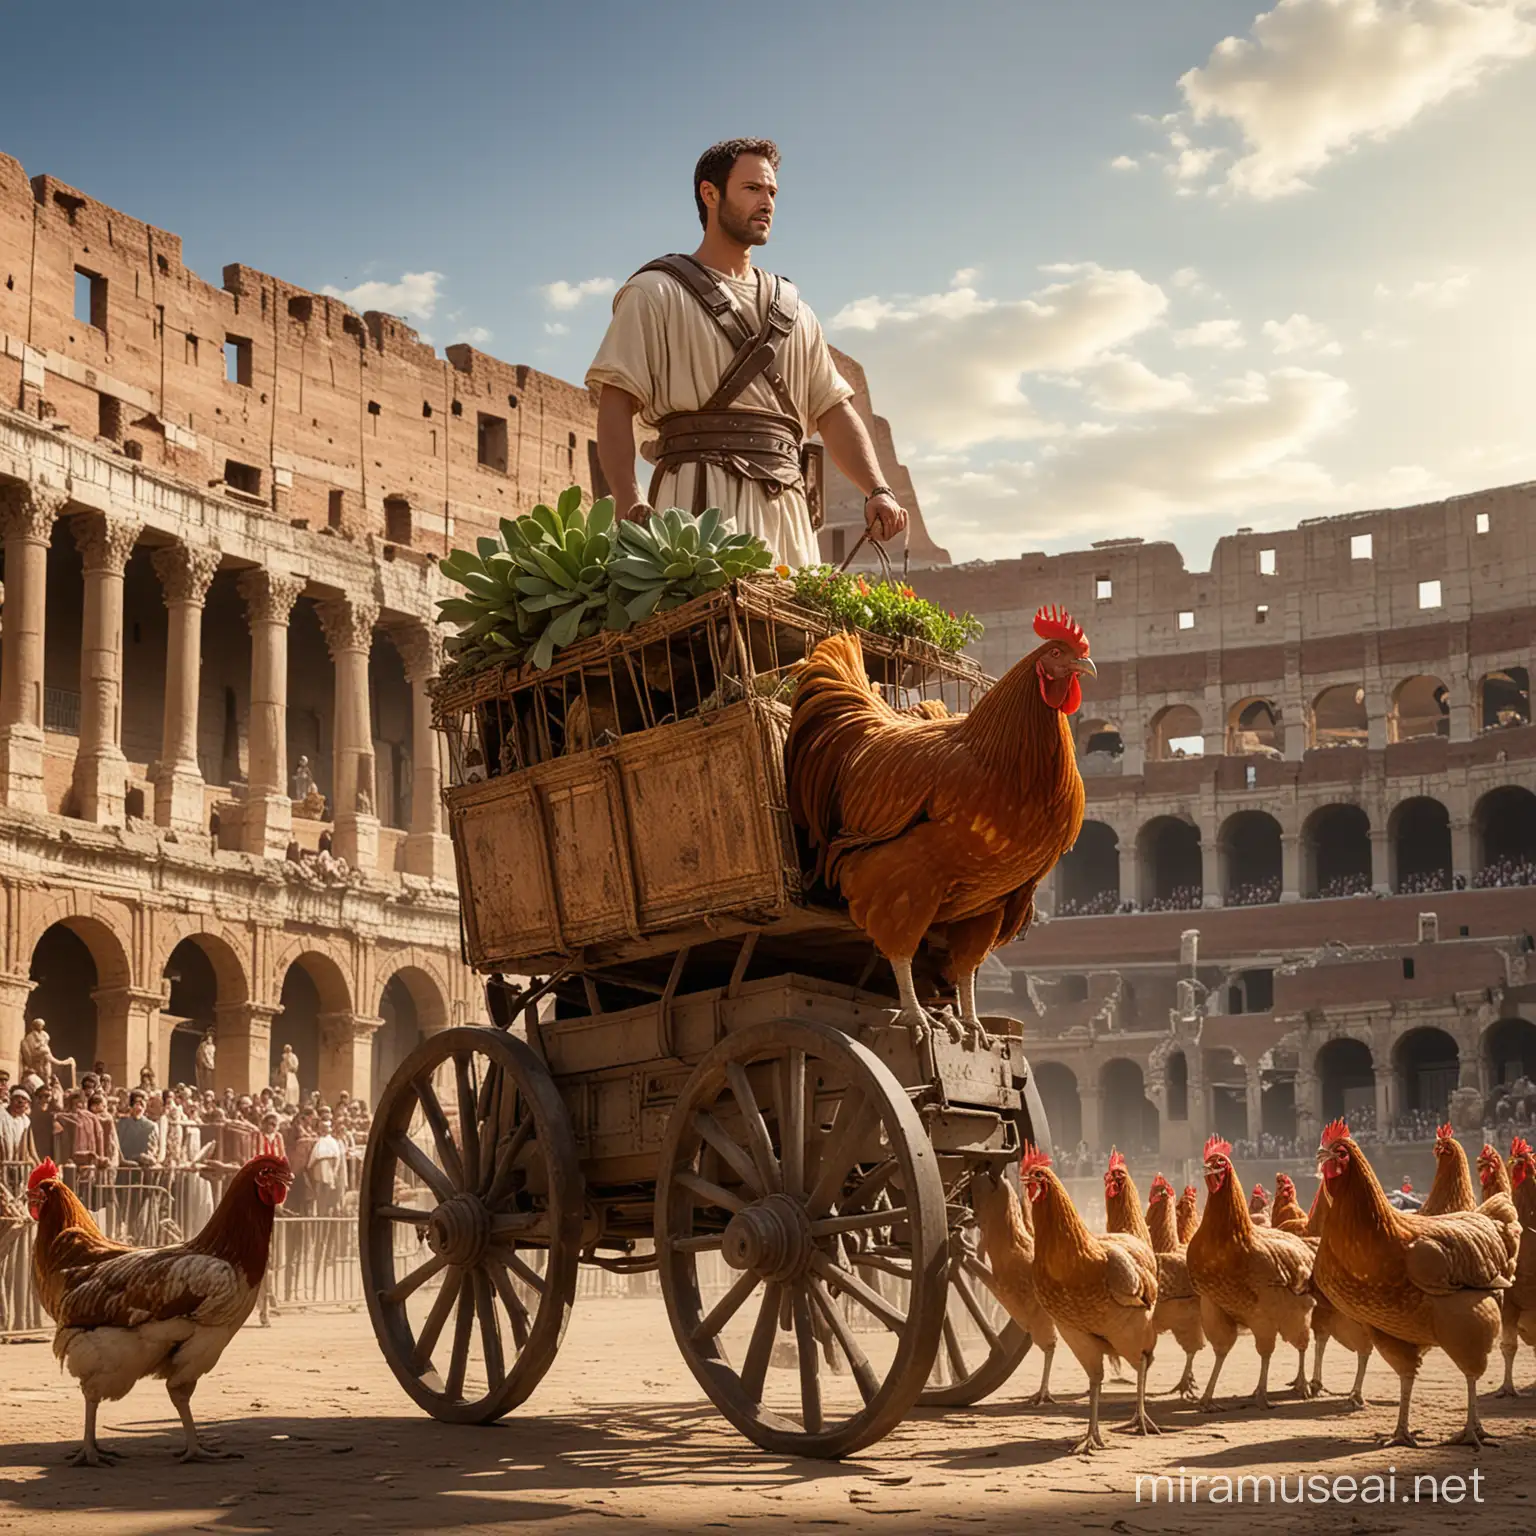 BenHur Chariot Race with Giant Chickens in Roman Coliseum